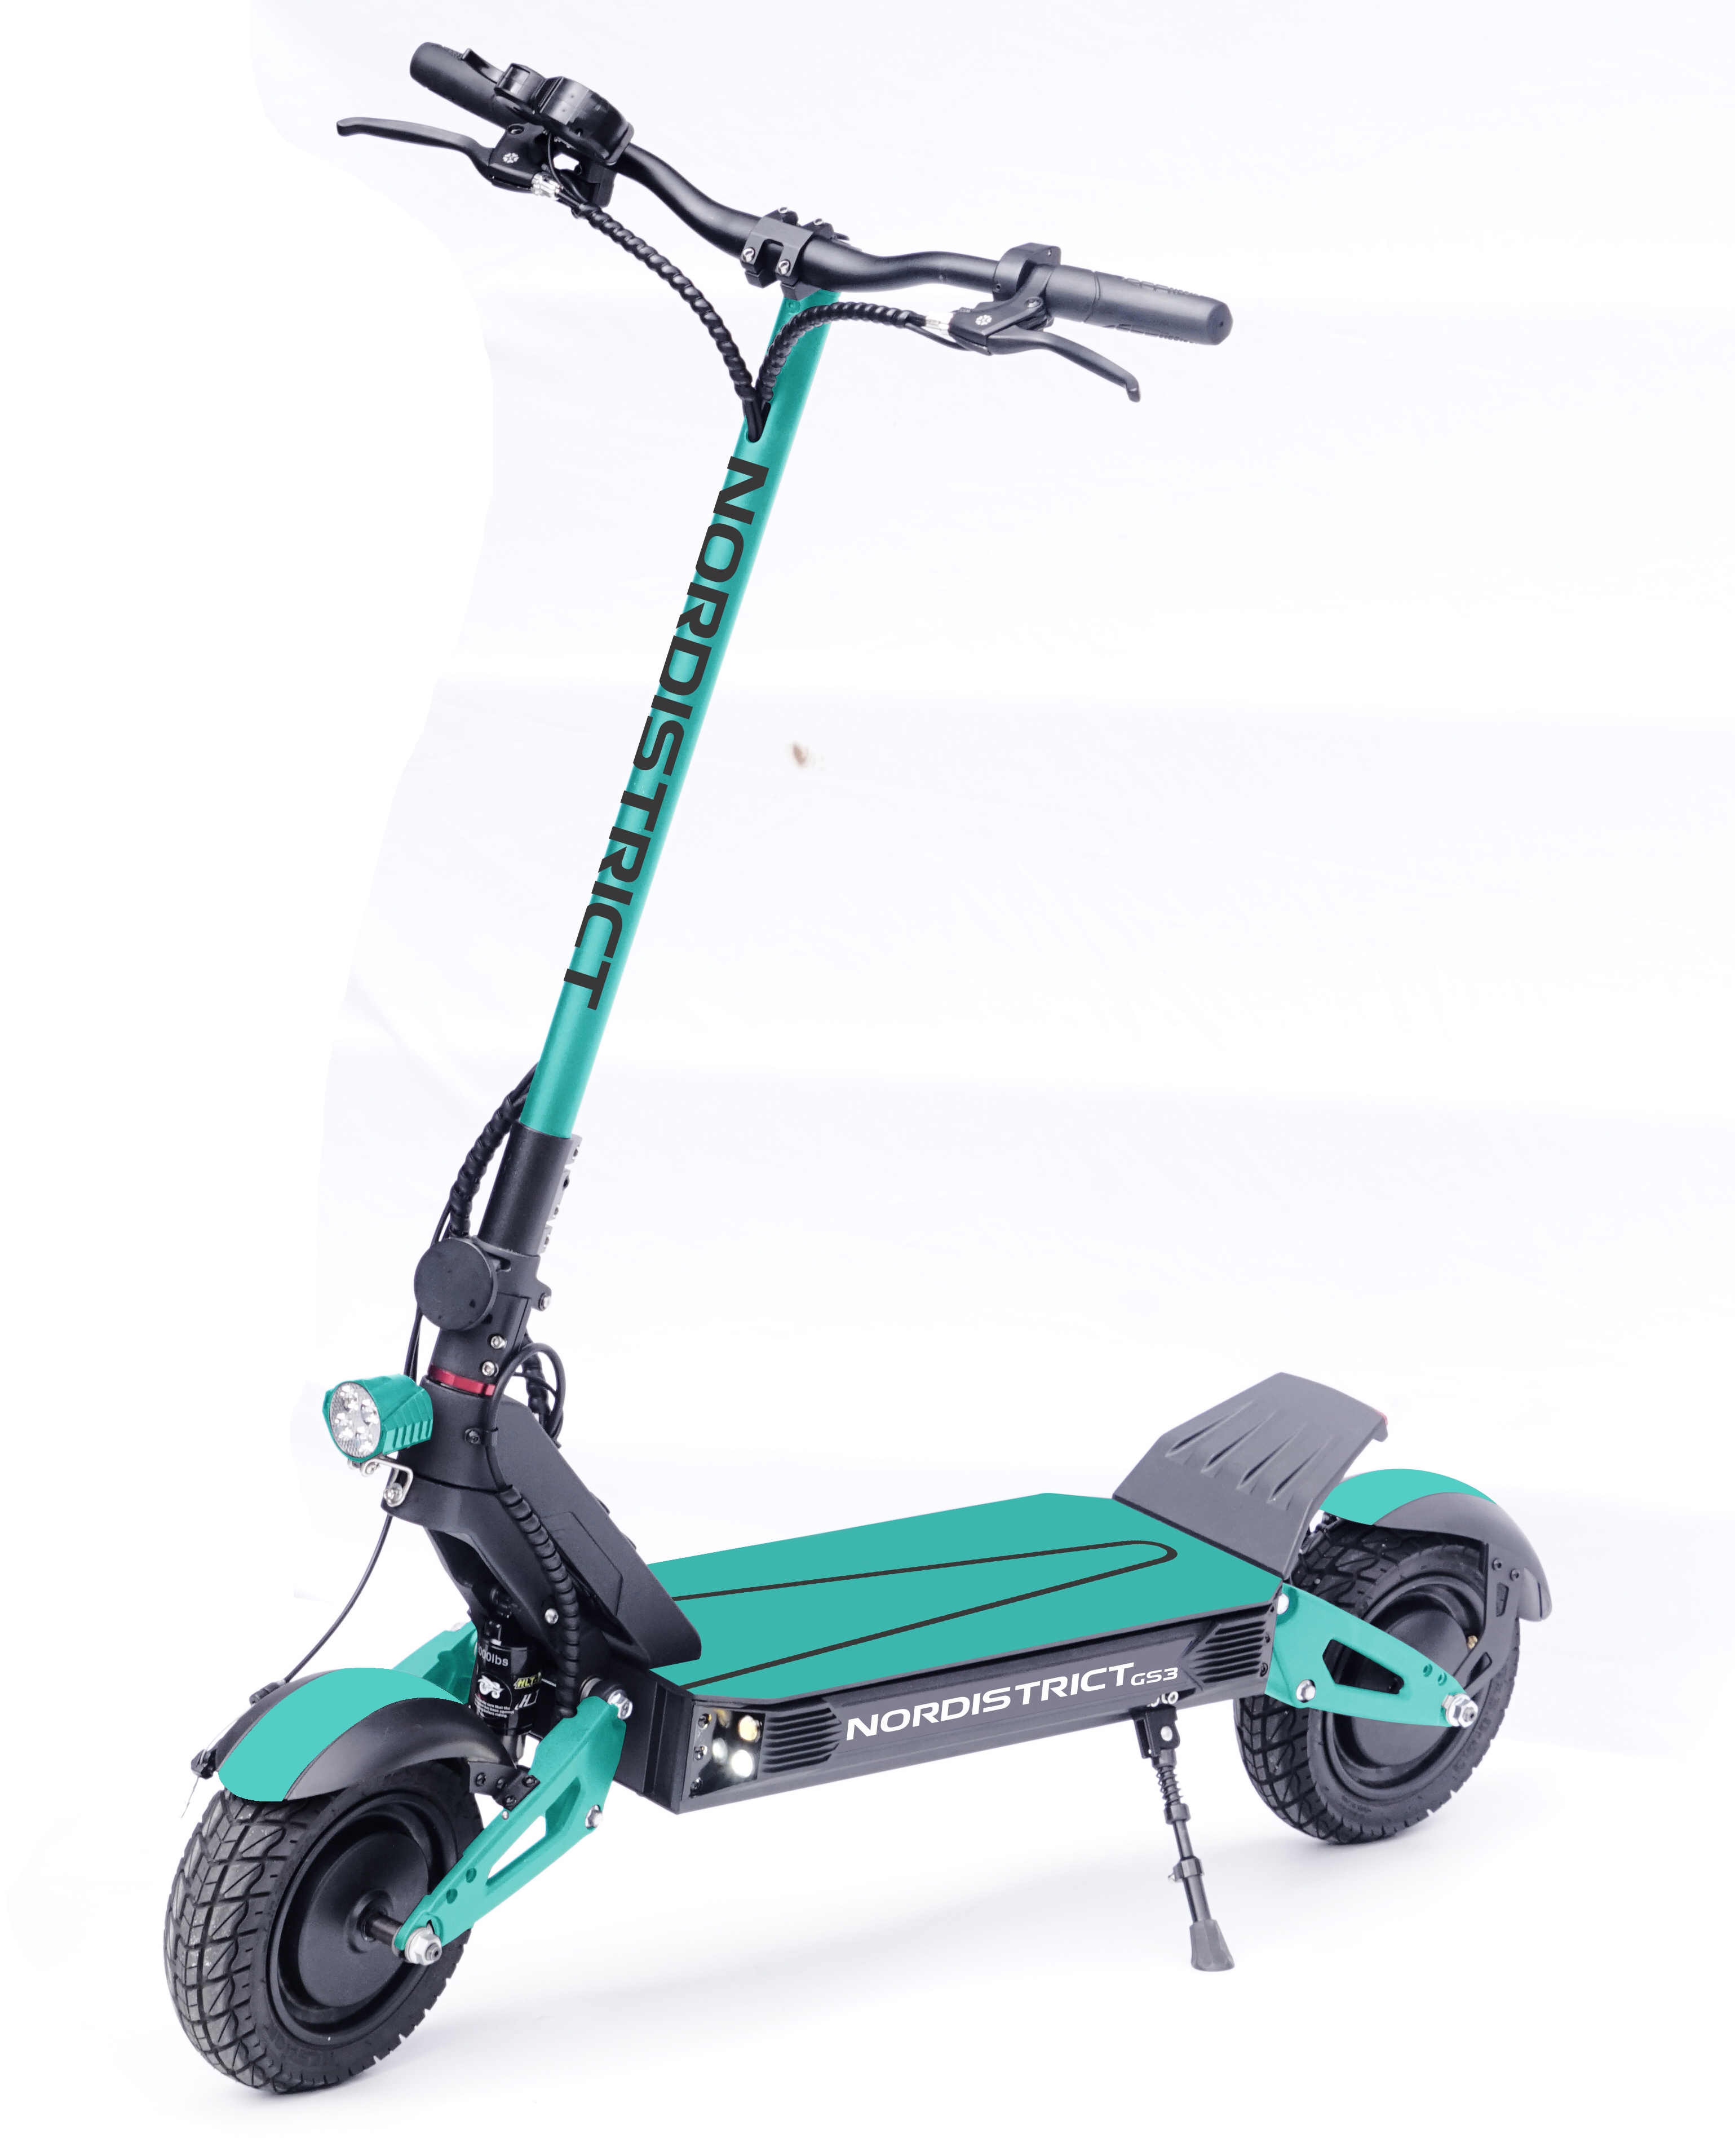 Adult 2 wheels E-scooter